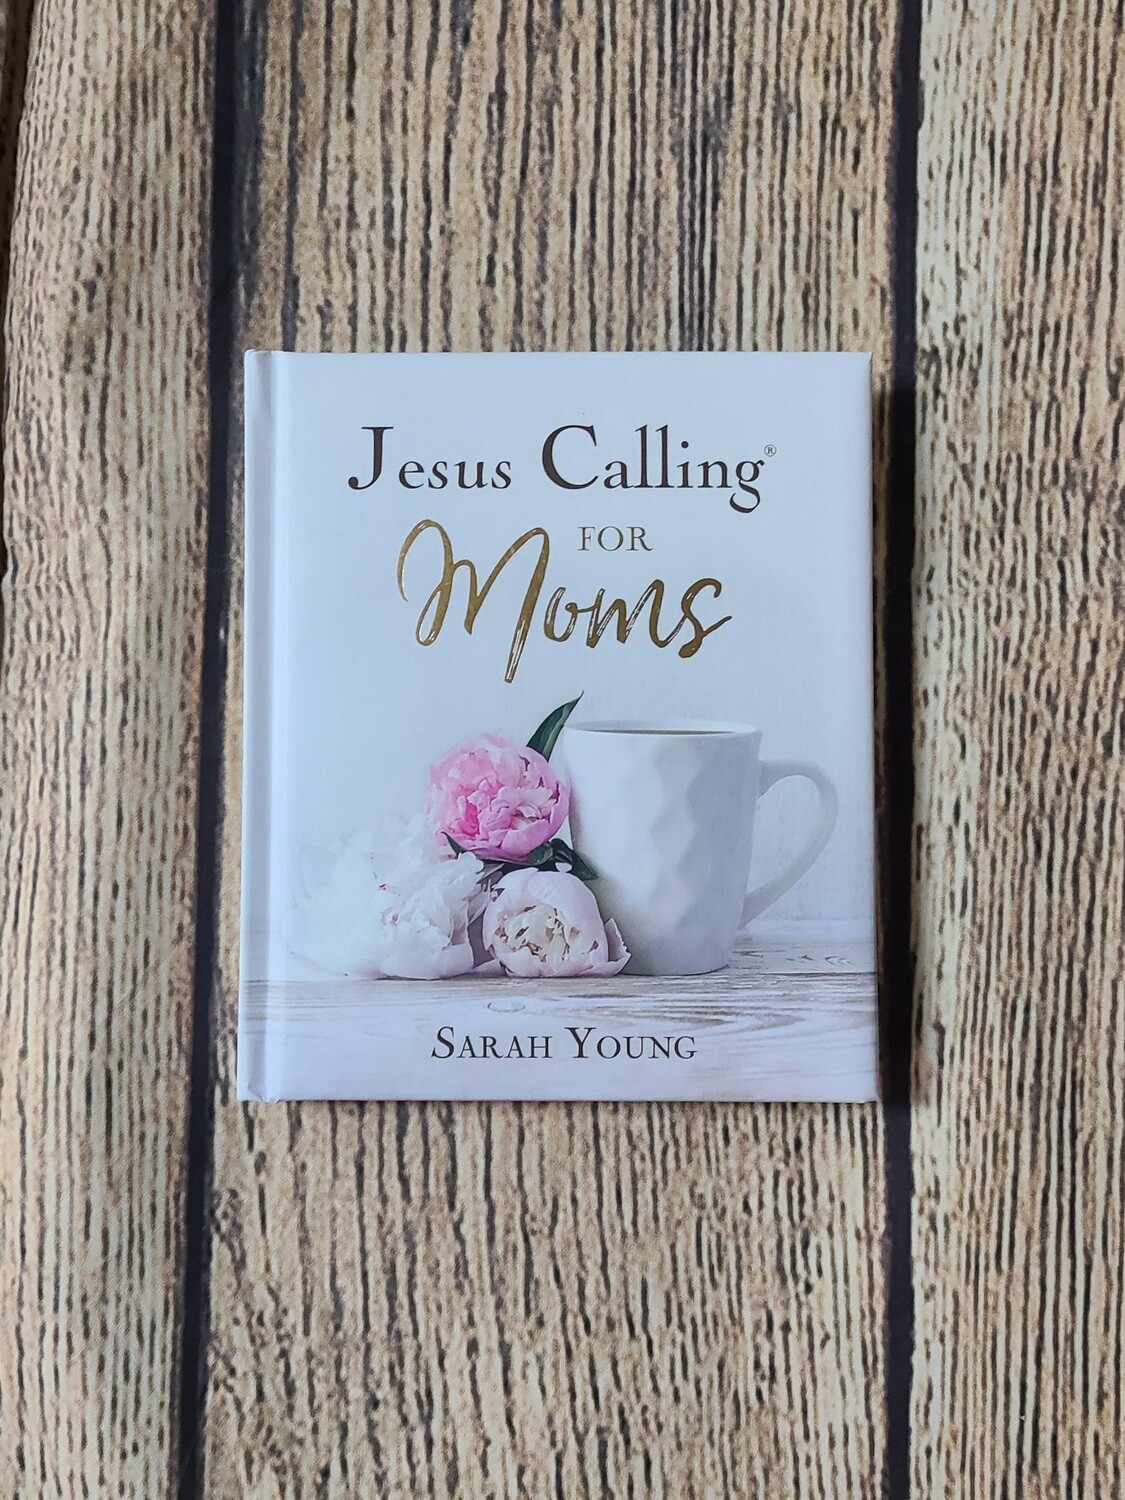 Jesus Calling for Moms by Sarah Young - Hardback - New